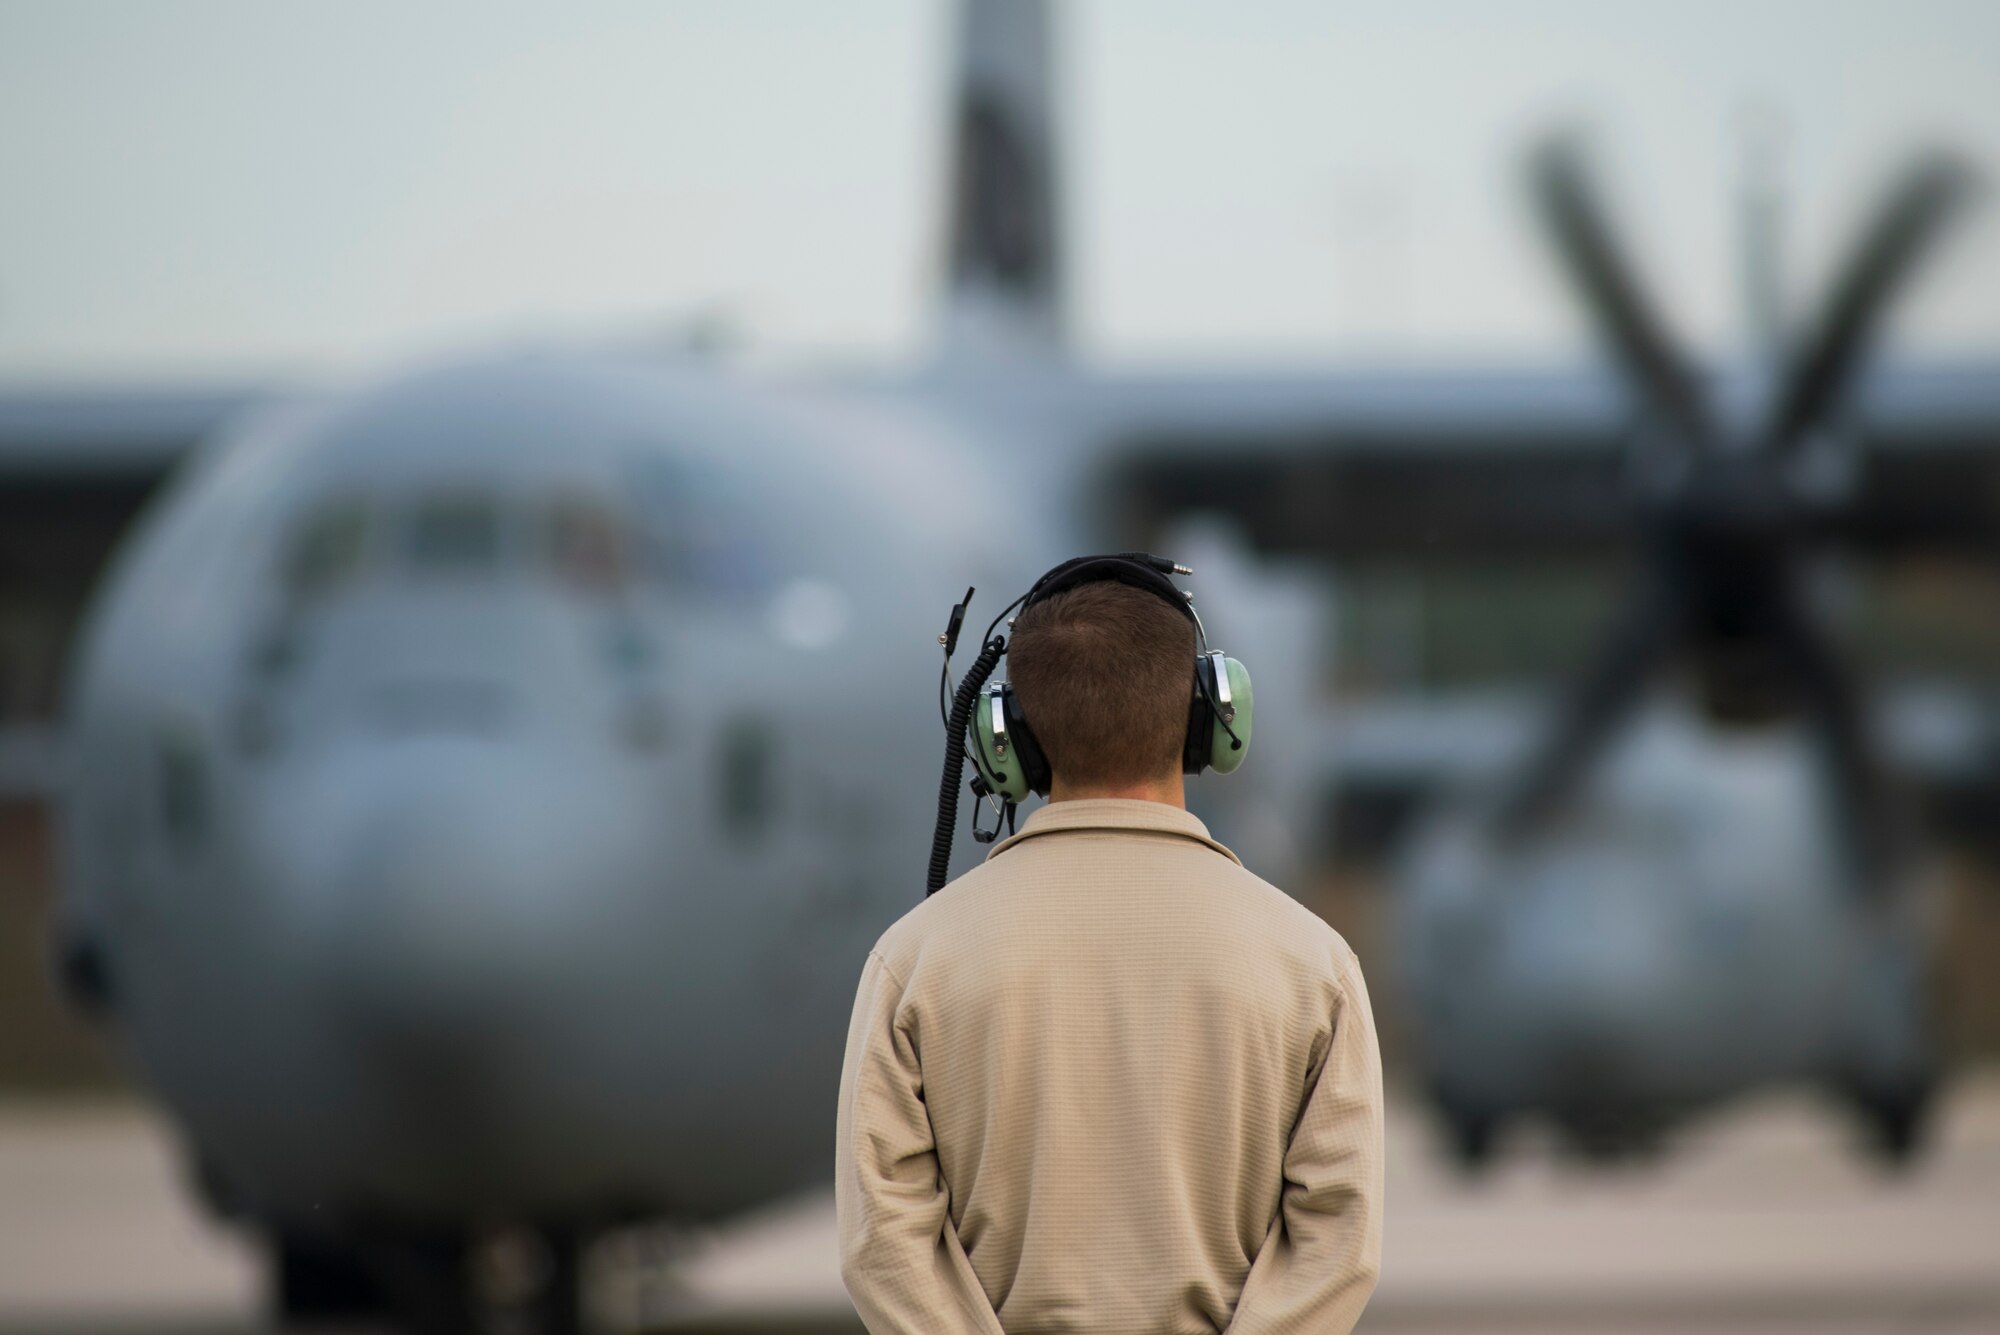 An 86th Aircraft Maintenance Squadron crew chief stands ready as a C-130J Super Hercules aircraft begins start up procedures on Ramstein Air Base, Germany, Nov. 6, 2018. Crew chiefs are responsible for the aircraft on the ground while aircrew responsible for the aircraft during missions. (U.S. Air Force photo by Senior Airman Devin M. Rumbaugh)